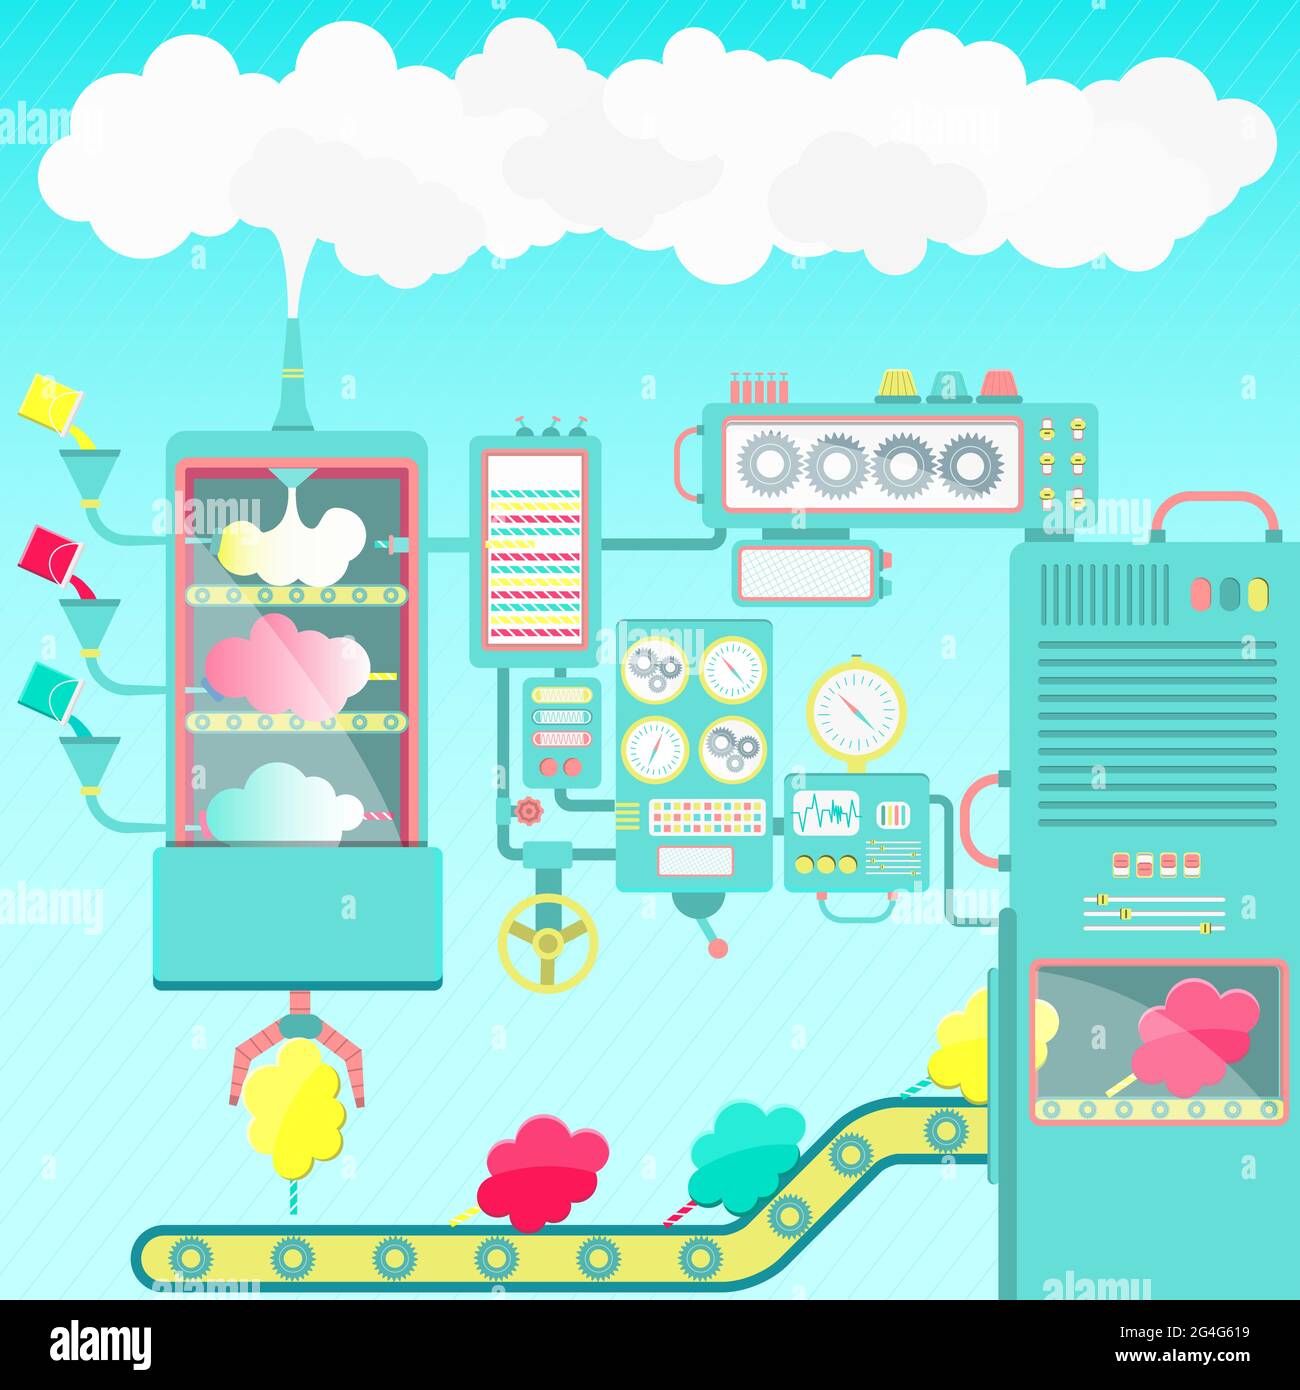 Creative And imaginative cotton candy factory made of clouds. Cute machines. Stock Vector